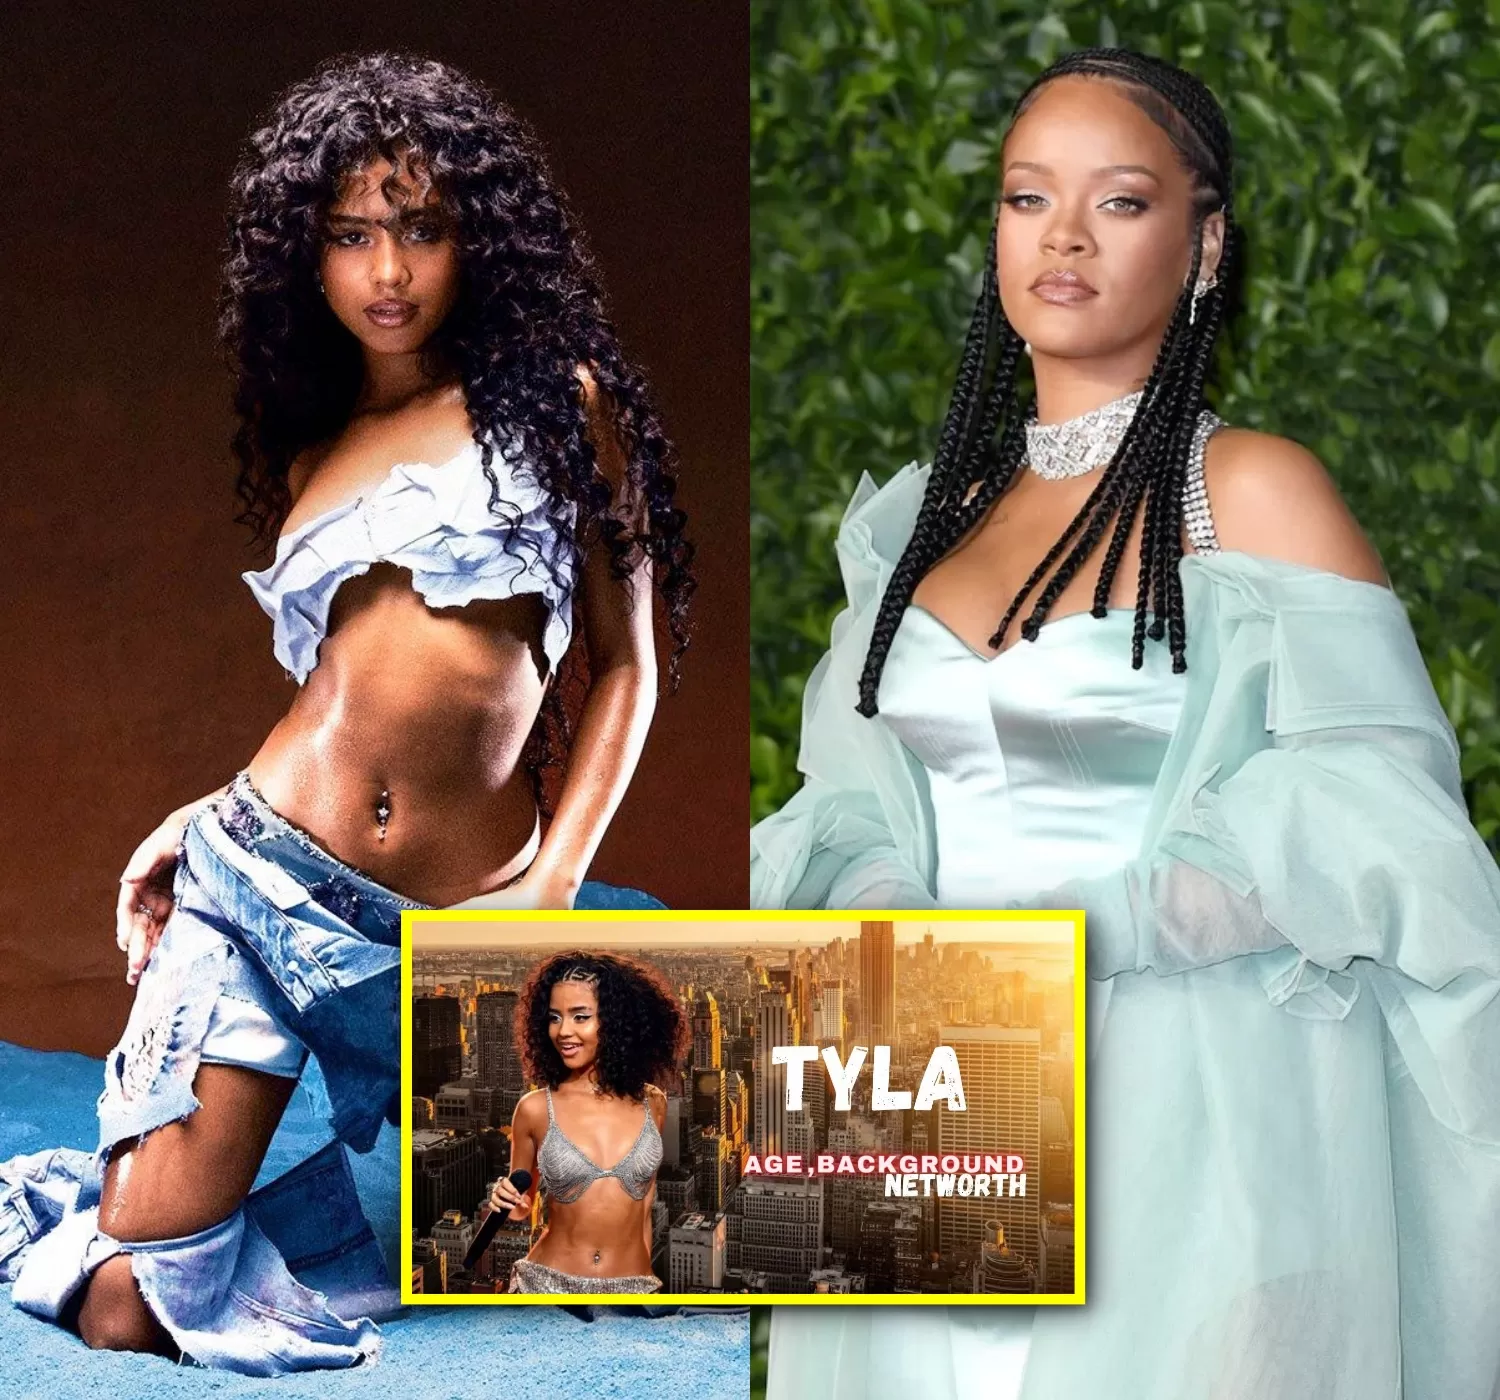 Cover Image for Tyla’s Net Worth vs her Idol Rihanaa. The results not surprising now but about 3 years …